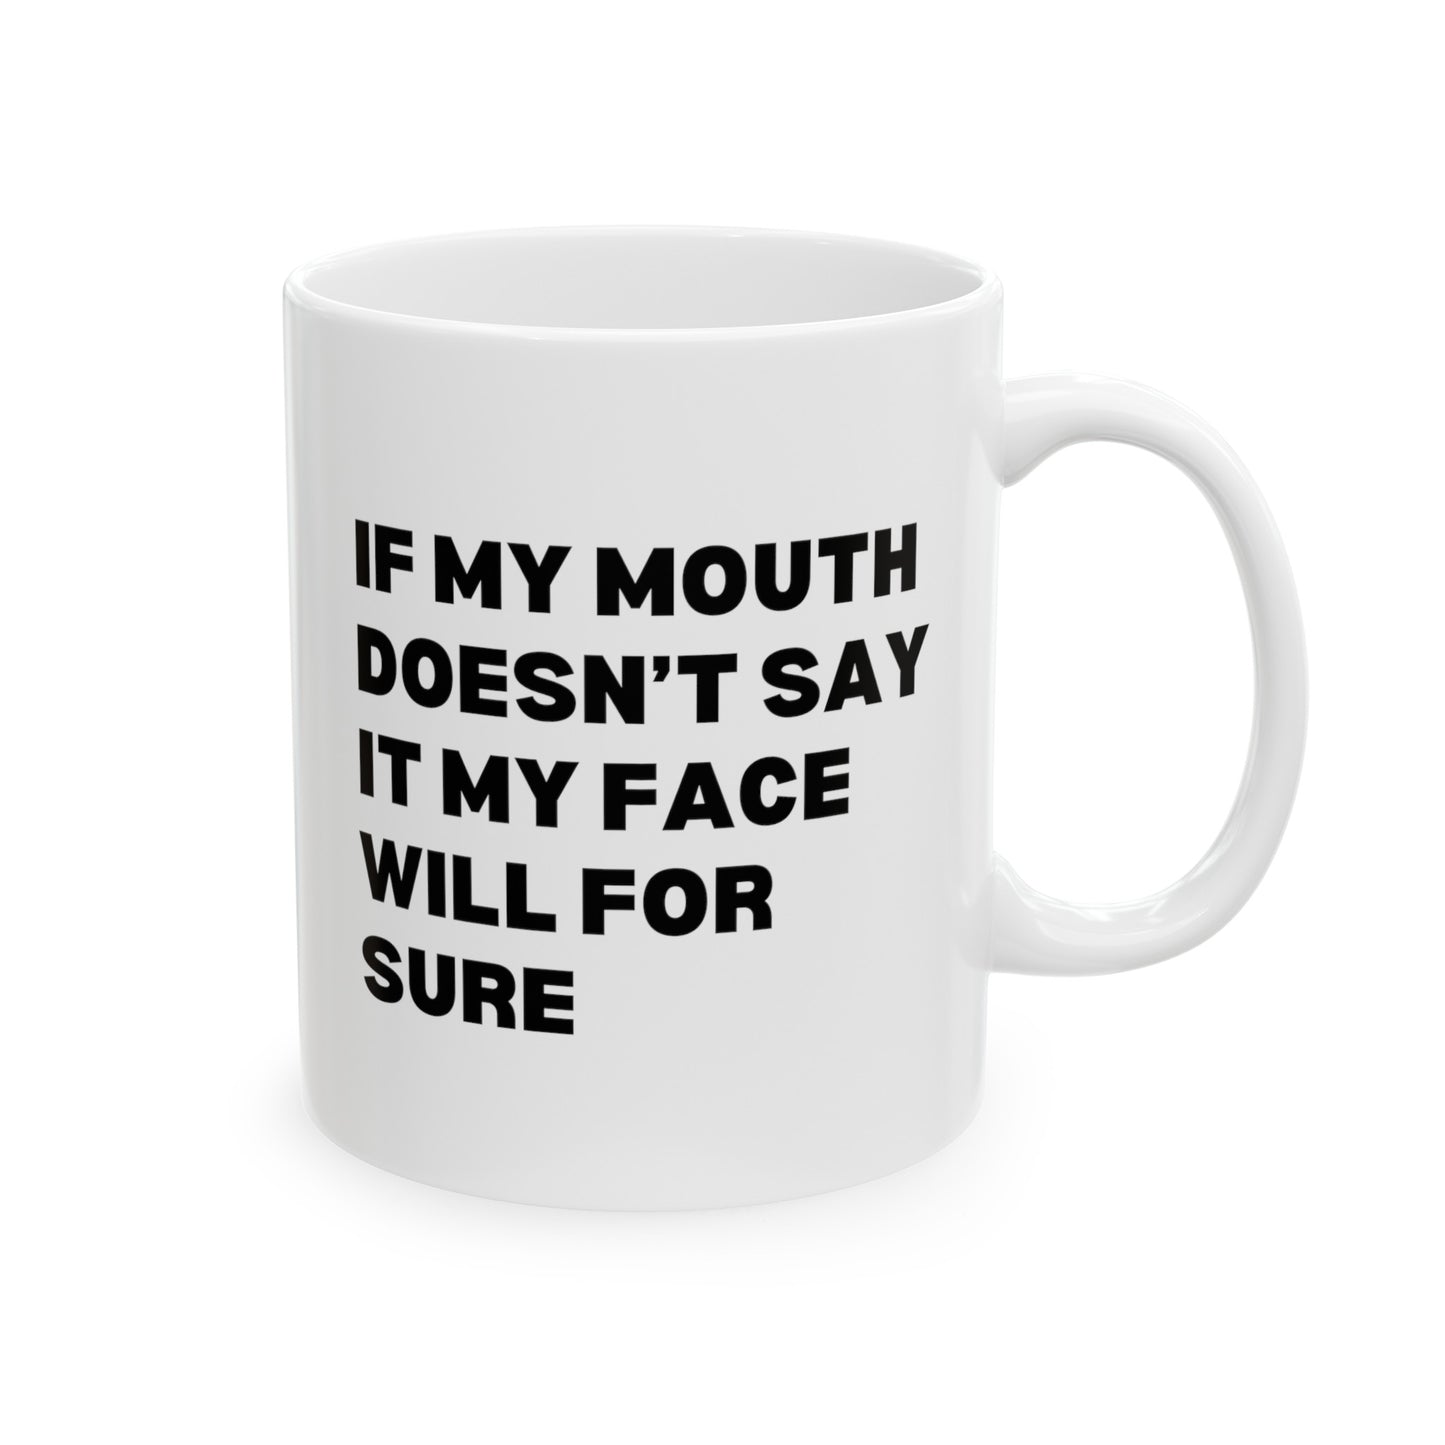 If My Mouth Doesn't Say It My Face Will For Sure 11oz white funny coffee mug tea cup gift for her best friend office sarcastic sarcasm coworker waveywares wavey wares wavywares wavy wares